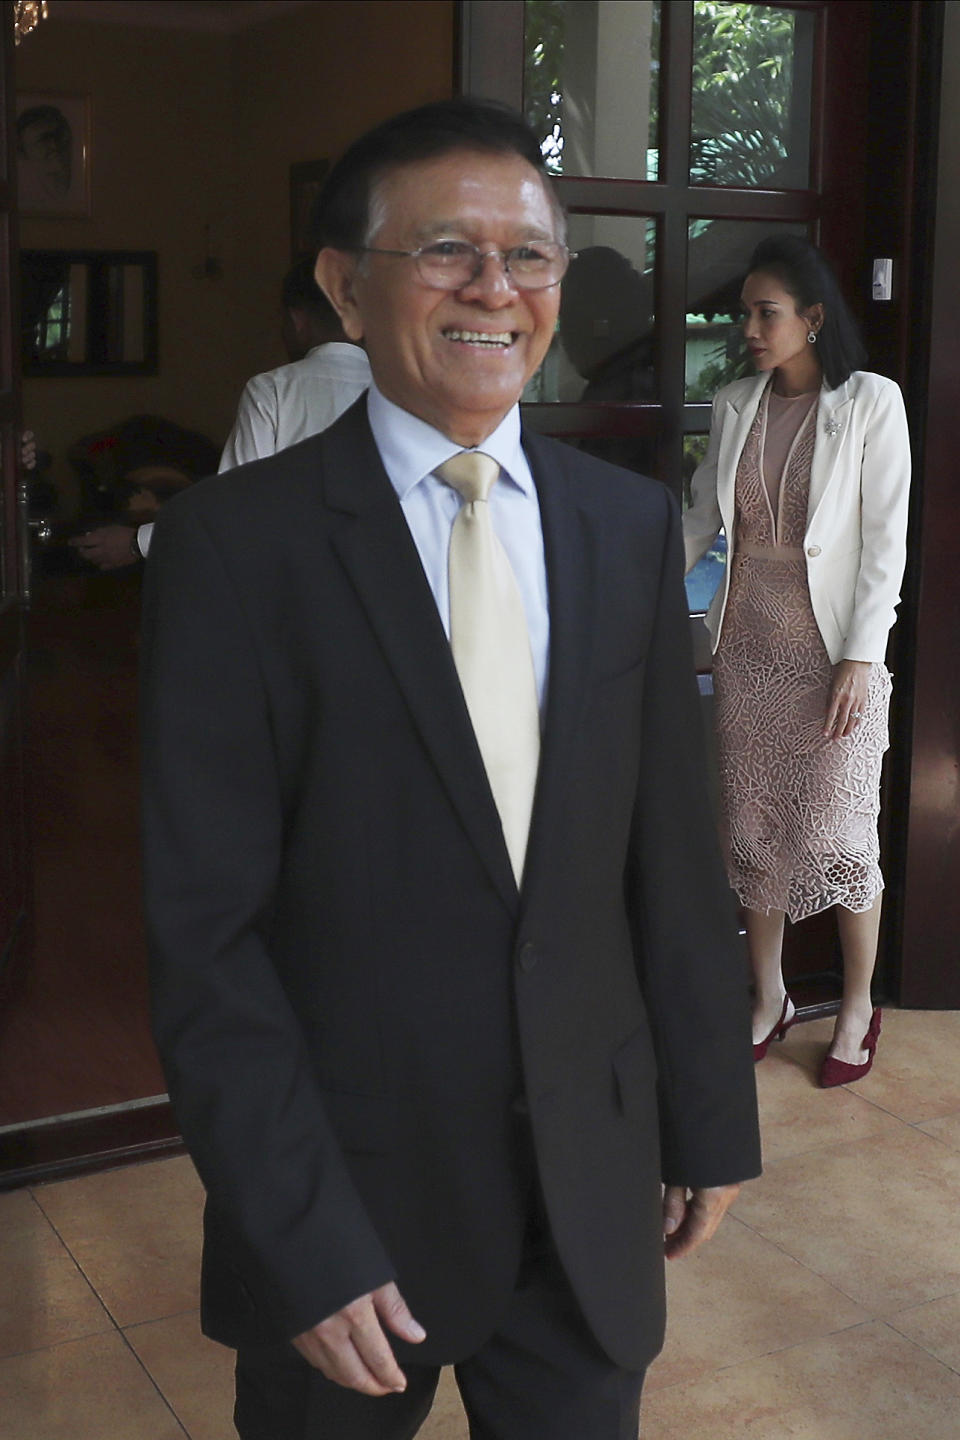 Cambodia National Rescue Party's President Kem Sokha walks to welcome French Ambassador to Cambodia Eva Nguyen Binh who arrives at his house in Phnom Penh, Cambodia, Monday, Nov. 11, 2019. A Cambodian court has lifted some restrictions on detained opposition leader Kem Sokha, essentially ending his house arrest. (AP Photo/Heng Sinith)